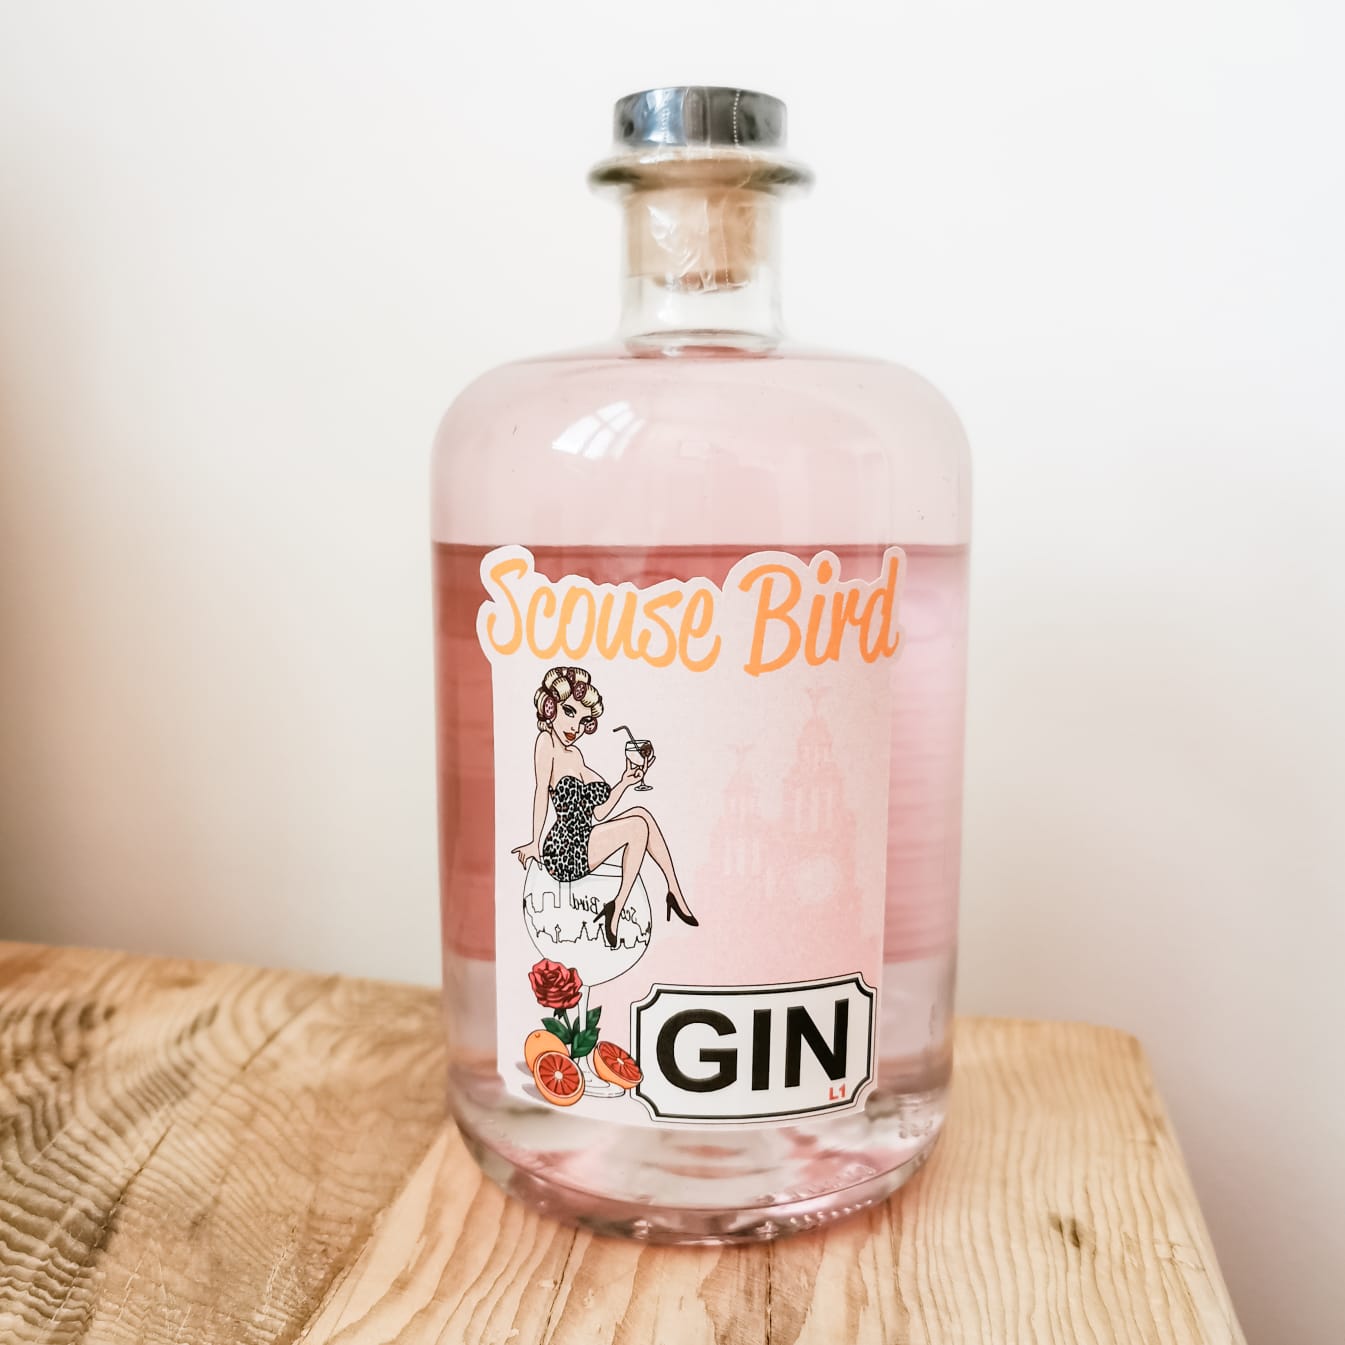 Load image into Gallery viewer, Scouse Bird Pink Gin 70cl
